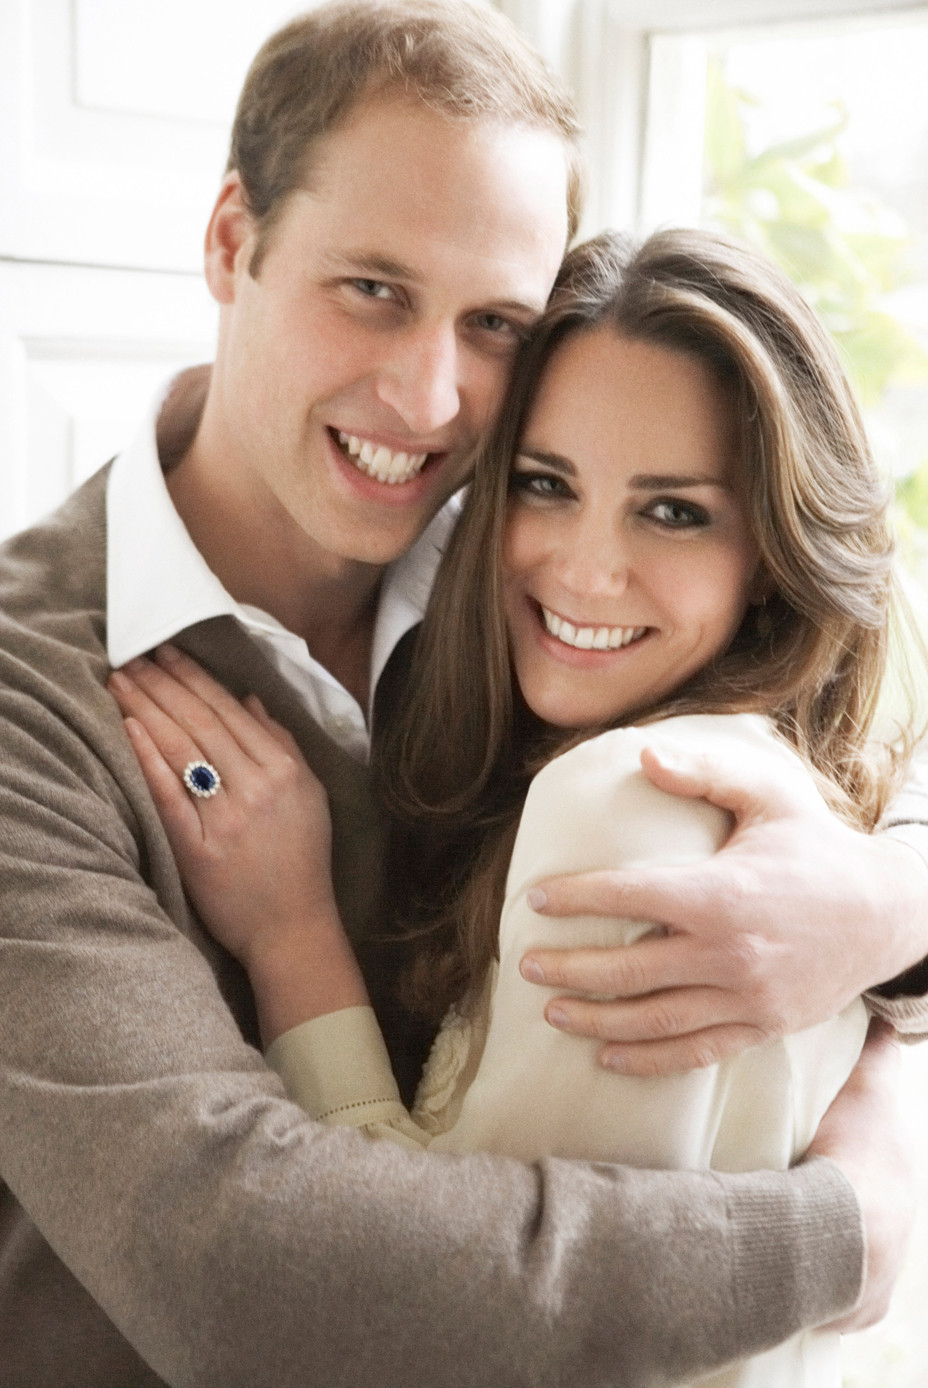 PRINCE-WILLIAM-KATE-MIDDLETON-OFFICIAL-ENGAGEMENT-